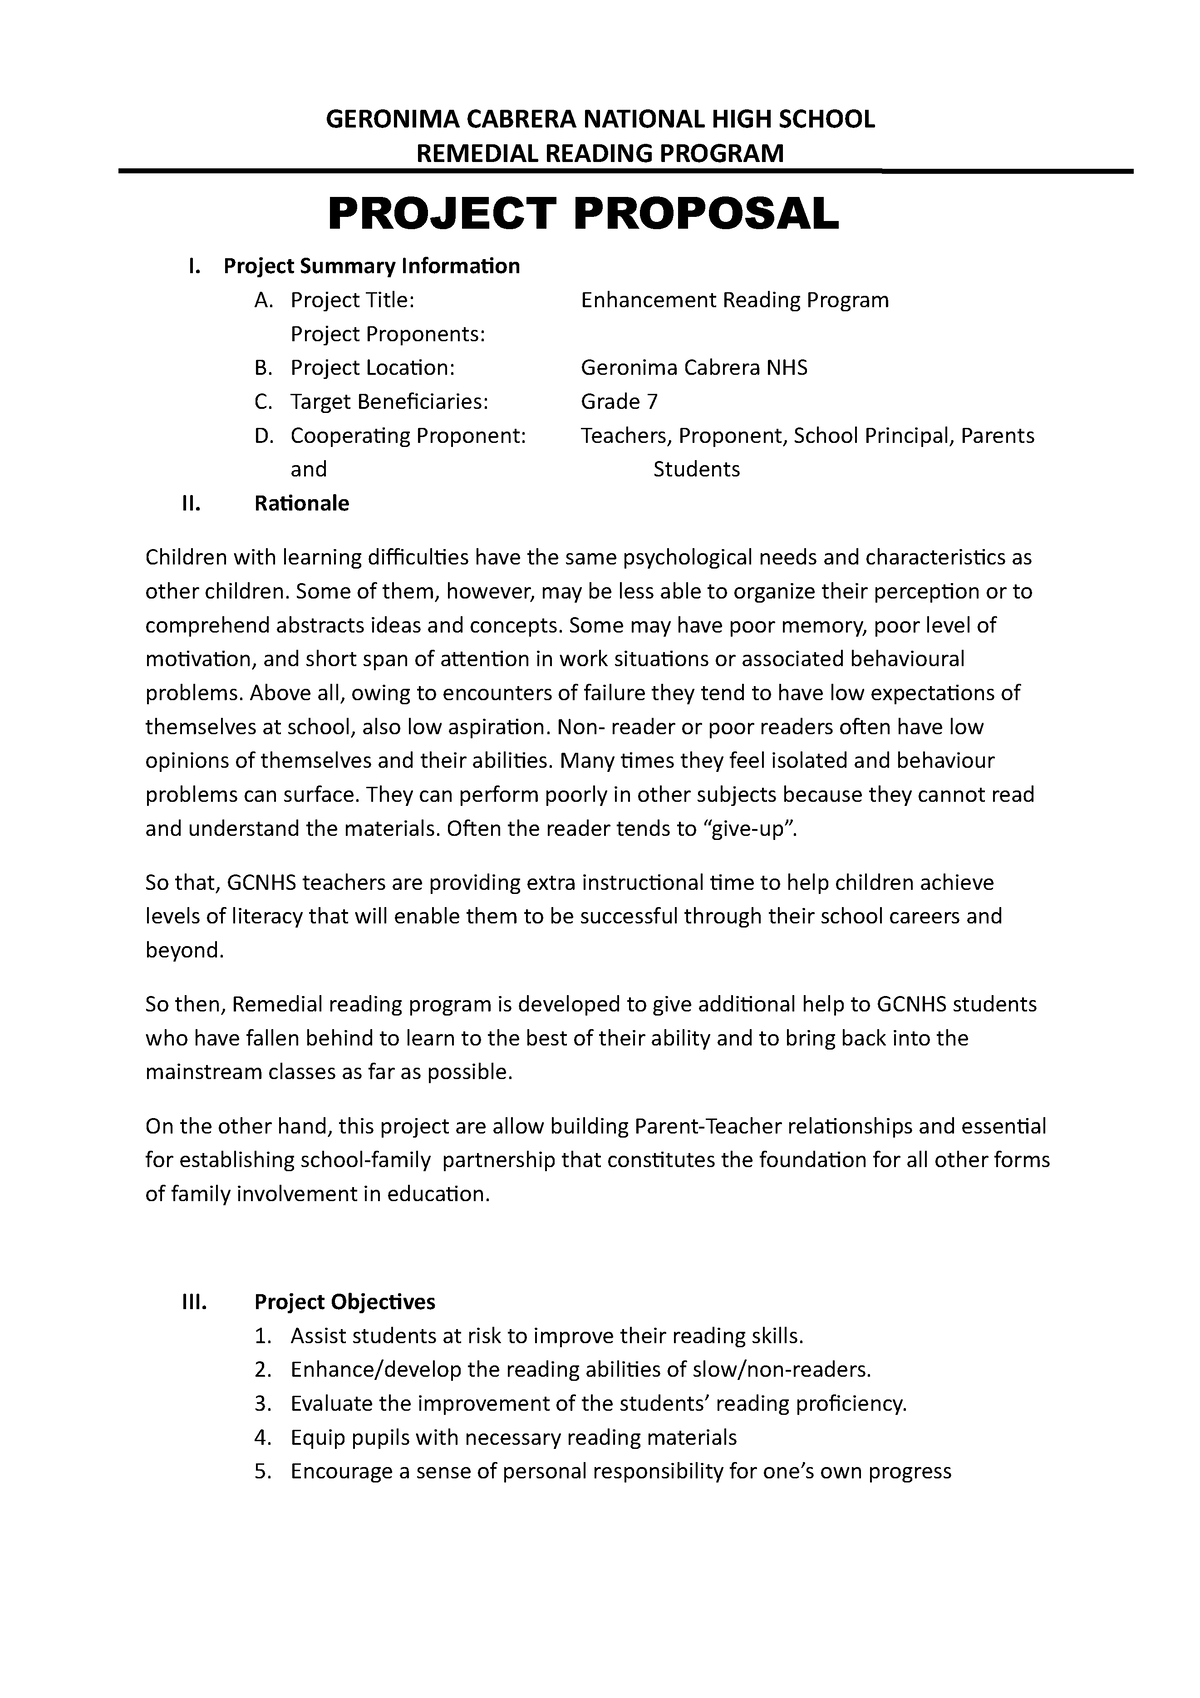 research proposal on reading skills pdf